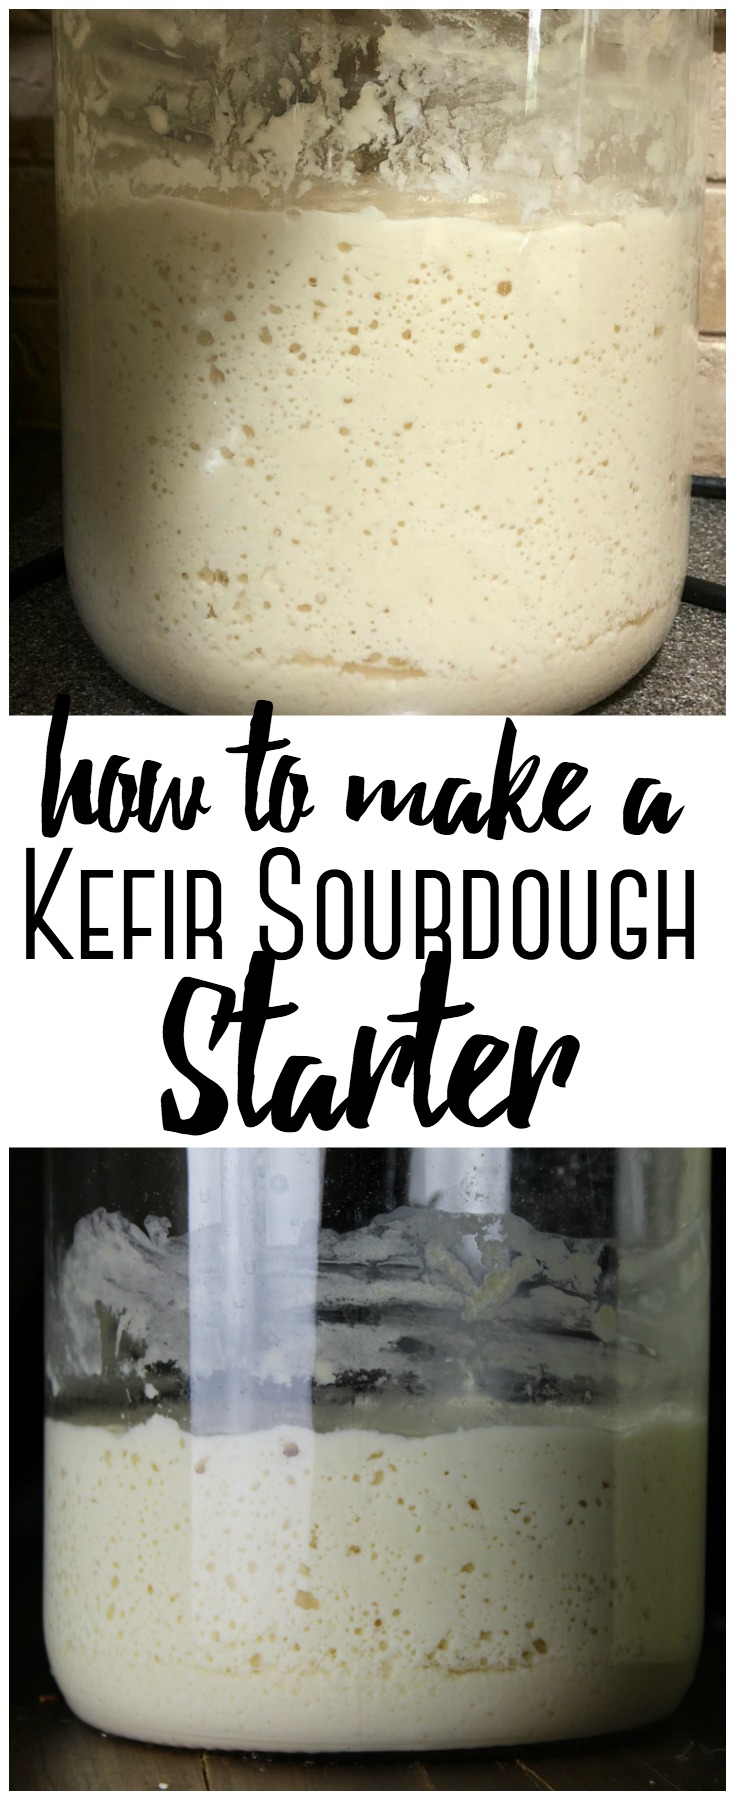 Gallon jar of kefir sourdough starter that's ready to use || This kefir sourdough starter uses natural bacteria and yeasts and is a twist on the traditional water and flour sourdough starter.